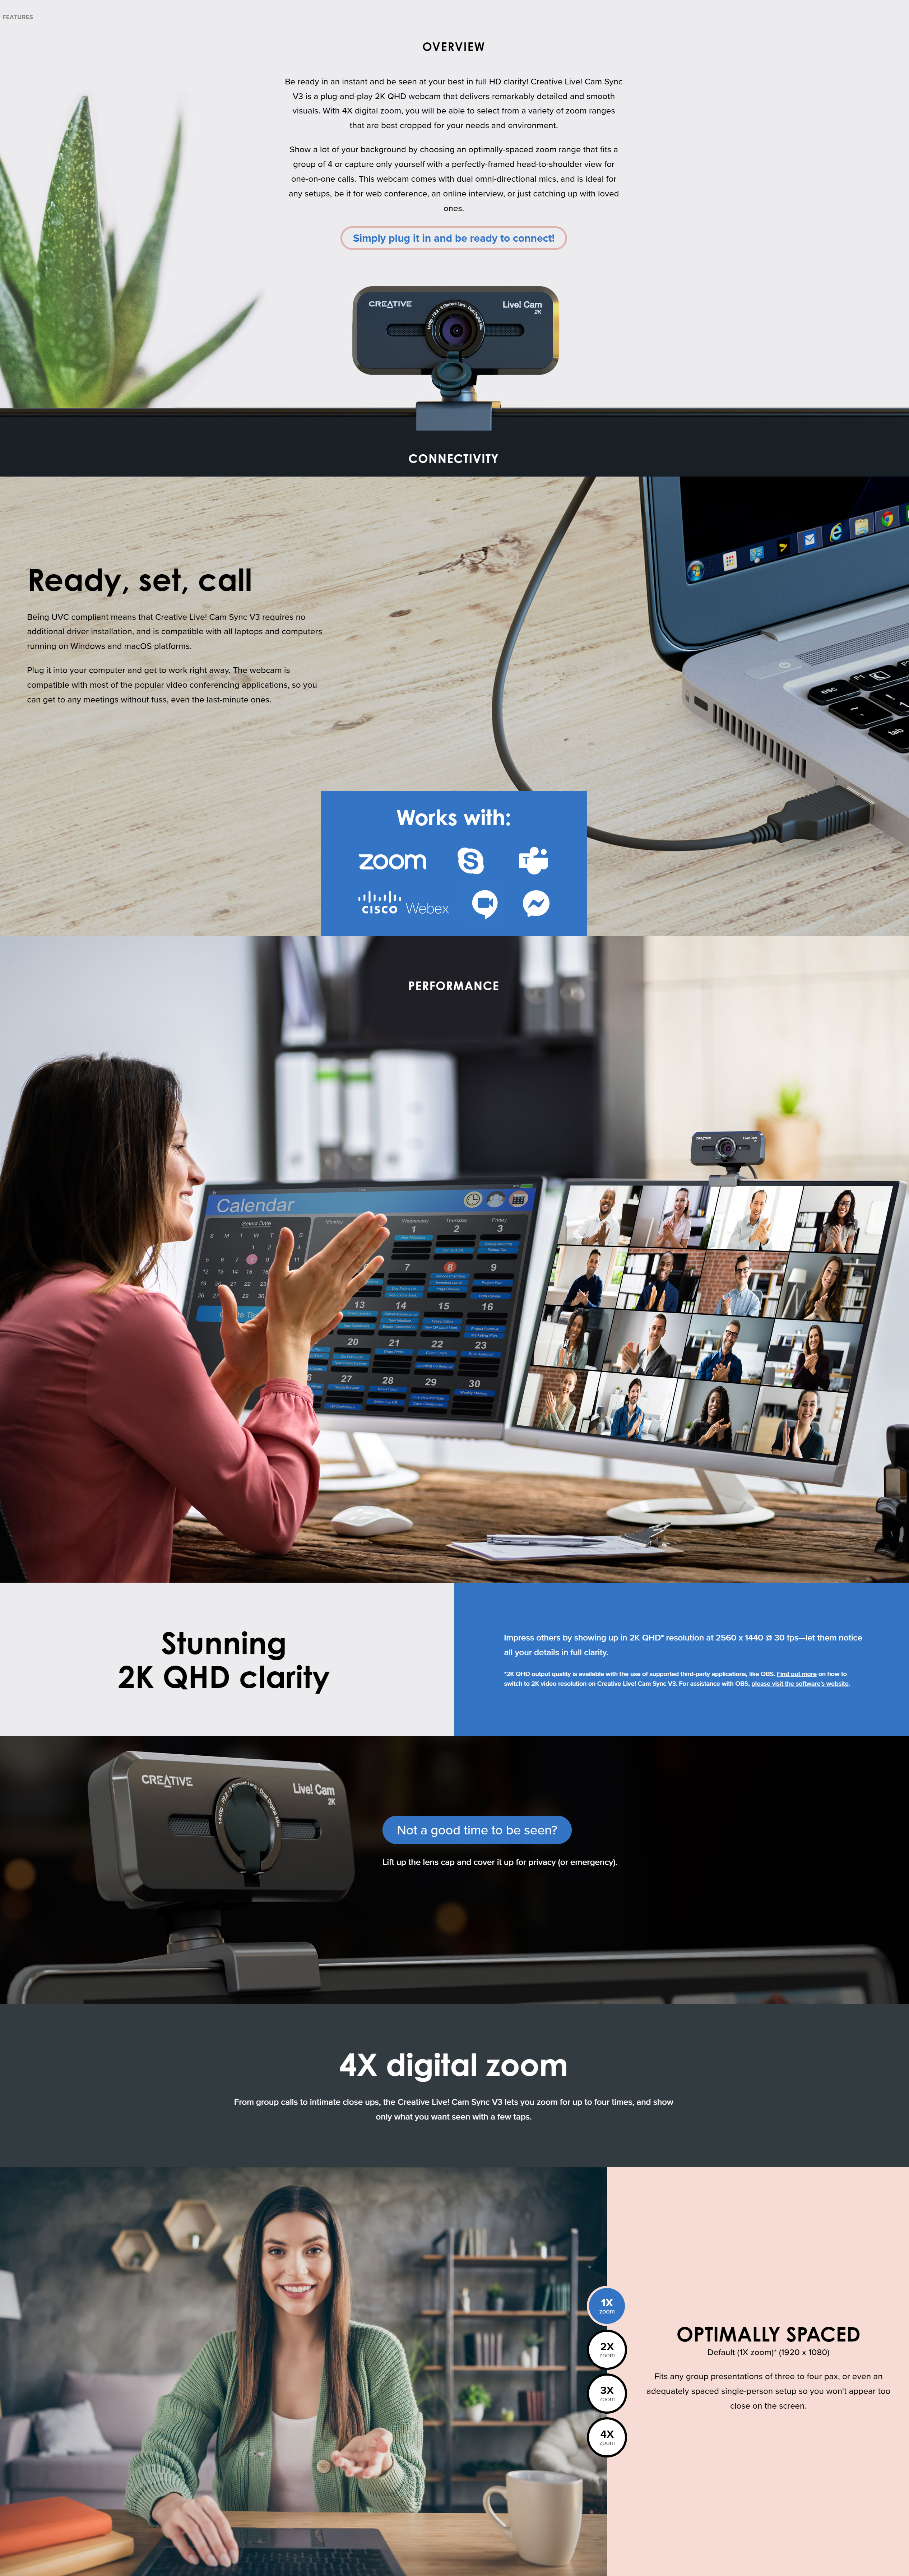 A large marketing image providing additional information about the product Creative Live! Cam Sync V3 2K QHD Webcam - Additional alt info not provided